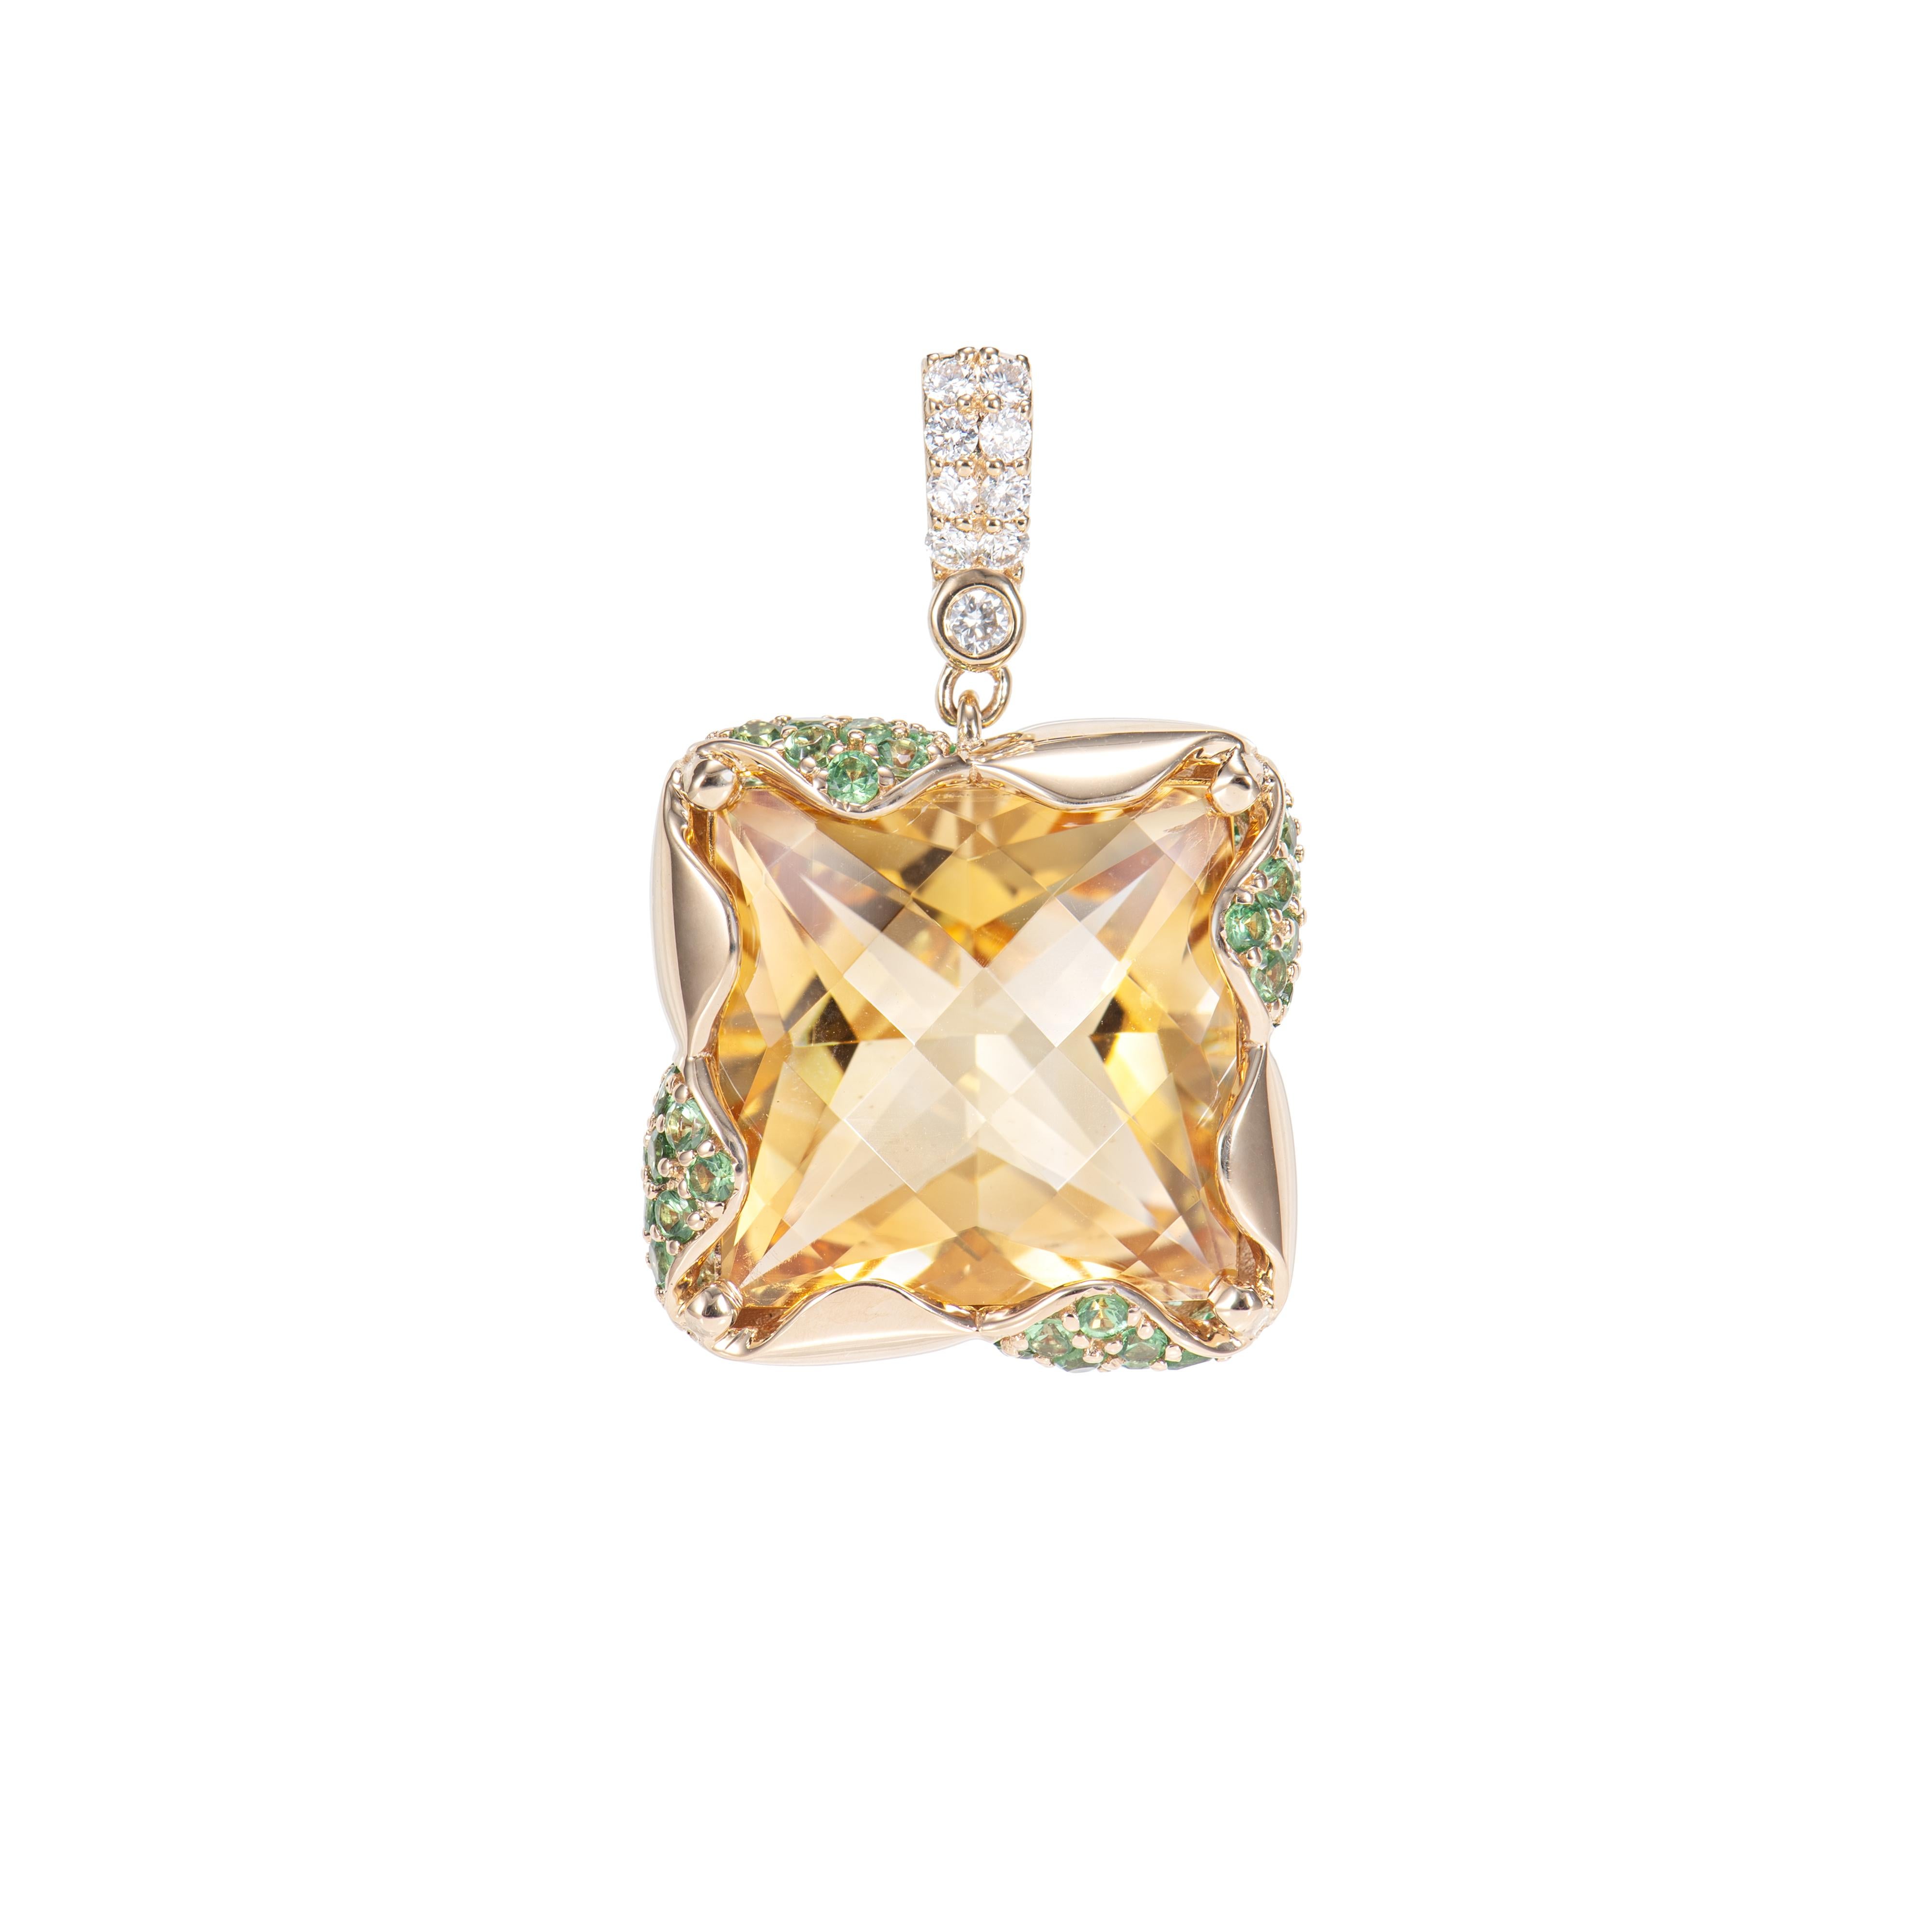 Contemporary 11.35 Carat Citrine Pendant in 18KYG with Tsavorite and White Diamond. For Sale